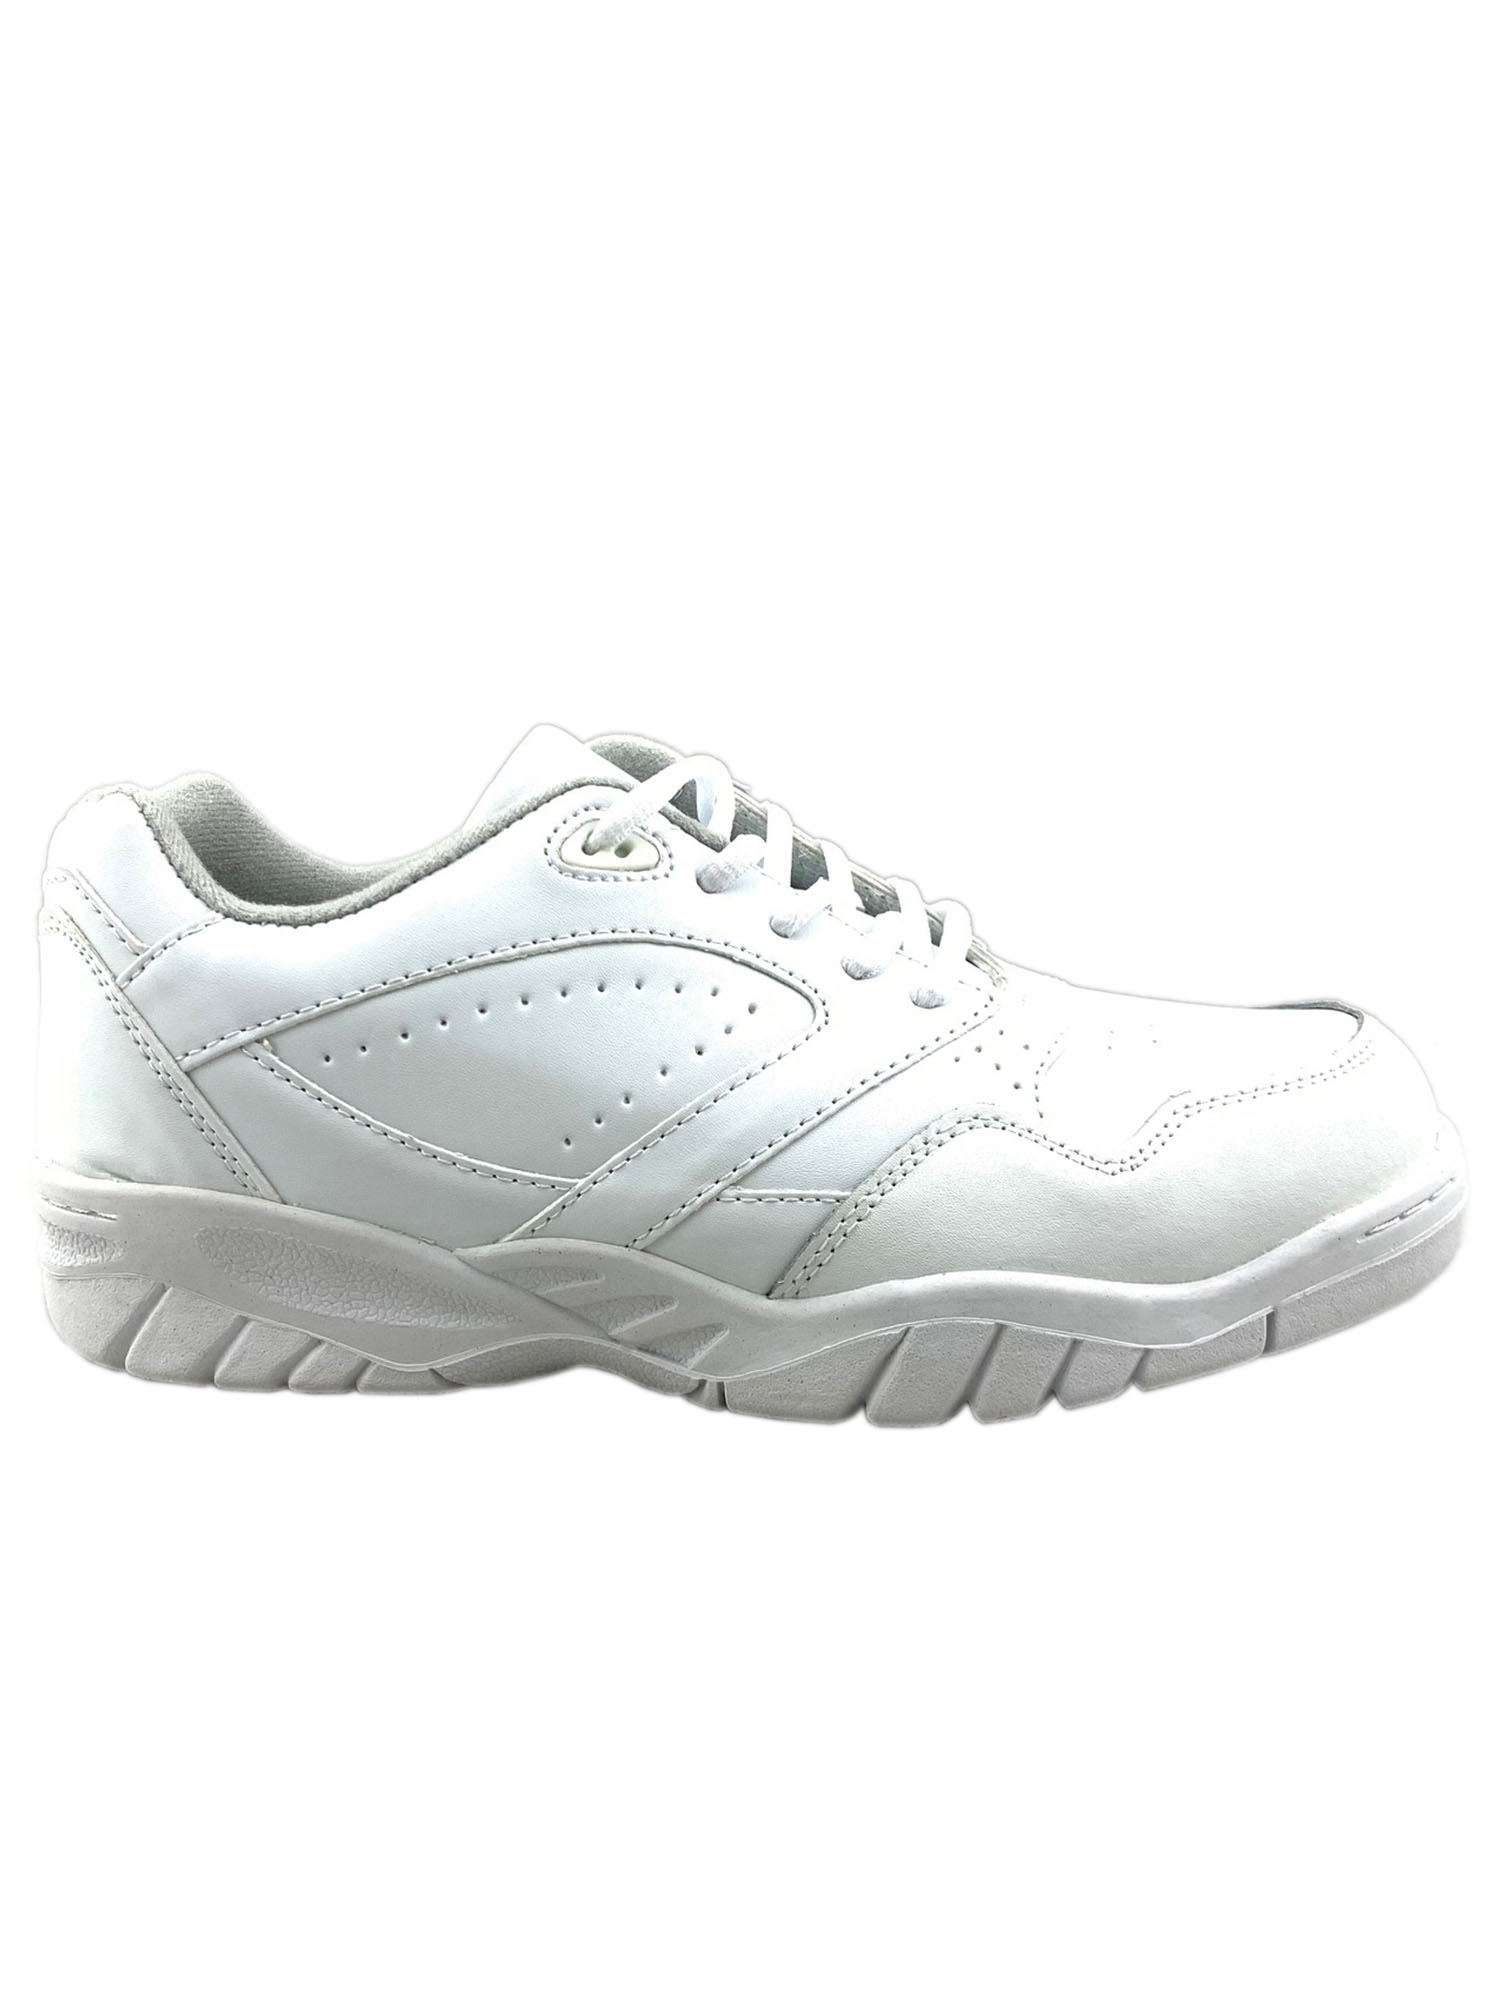 Tanleewa Men's Leather White Sports Shoes Lightweight Sneakers Breathable Casual Shoe Size 11.5 - image 1 of 5